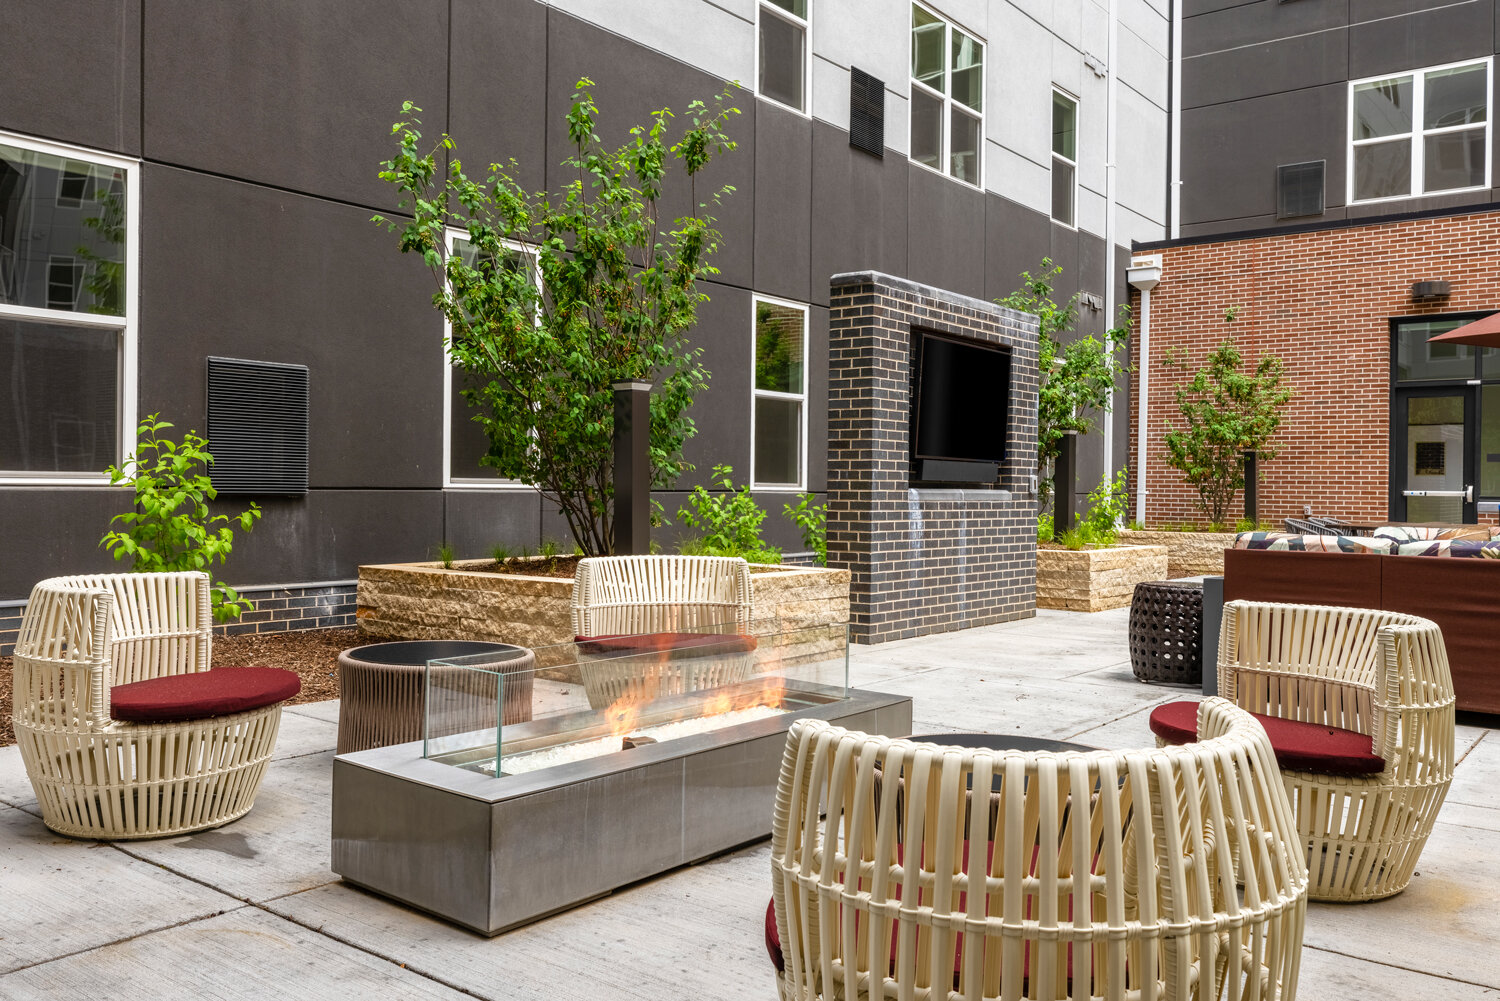 Outdoor Amenity Space Photo Credit: Ray Cavicchio Photography.jpg